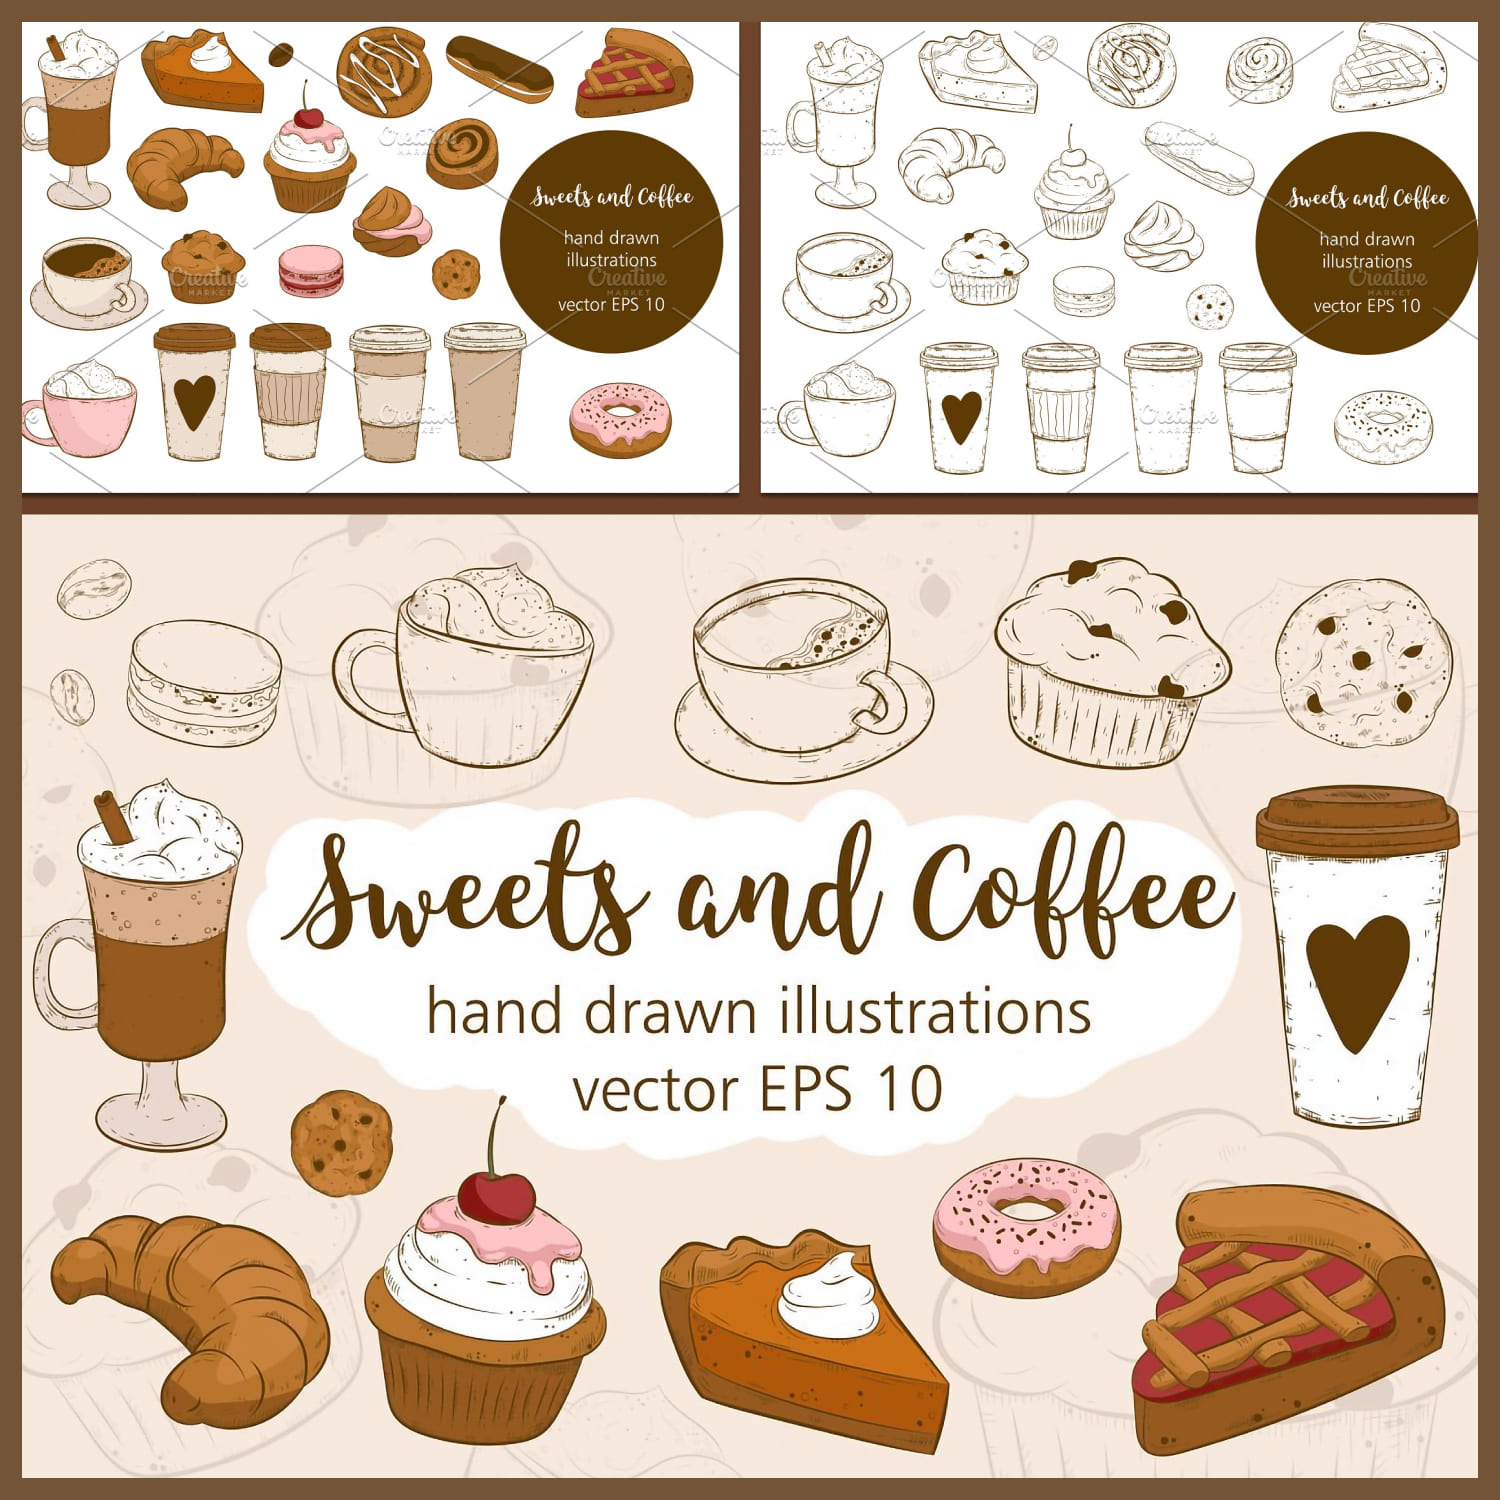 Sweets and Coffee created by Imaginasty.